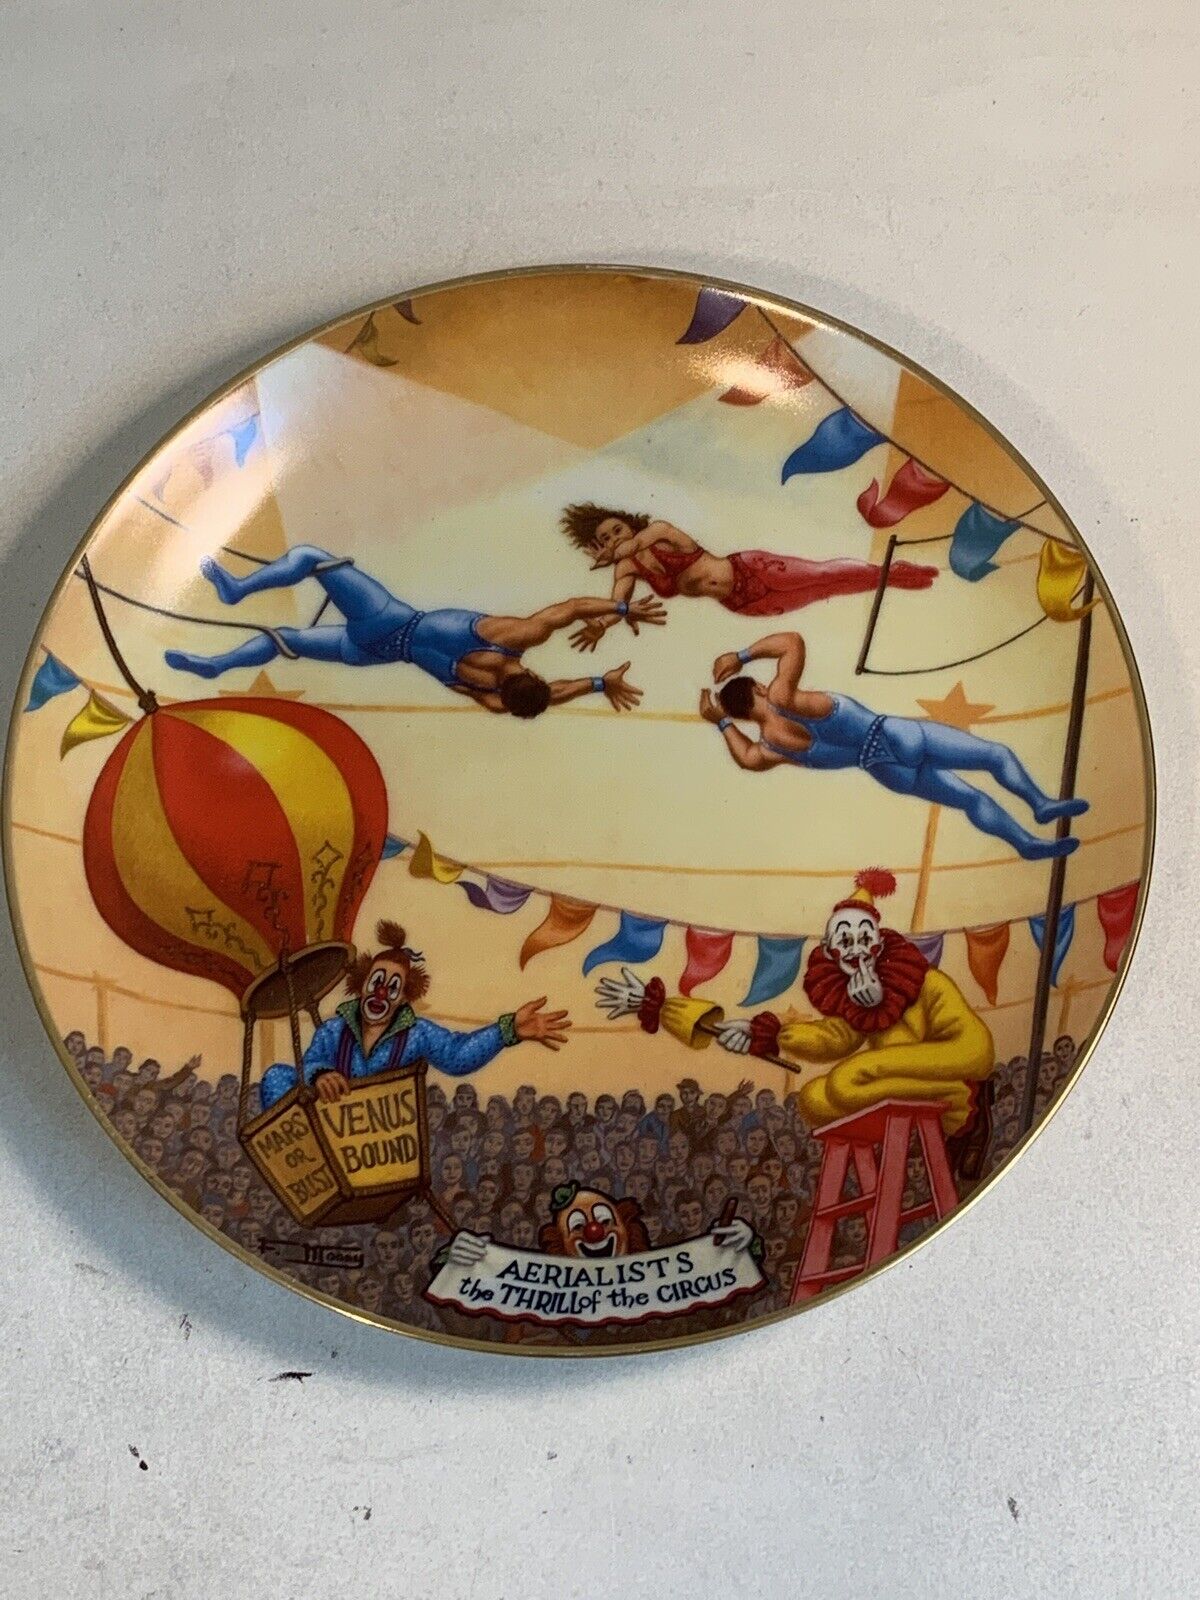 1981 Ringling Brothers Circus Collector Plate  Aerialists the Thrill Moody